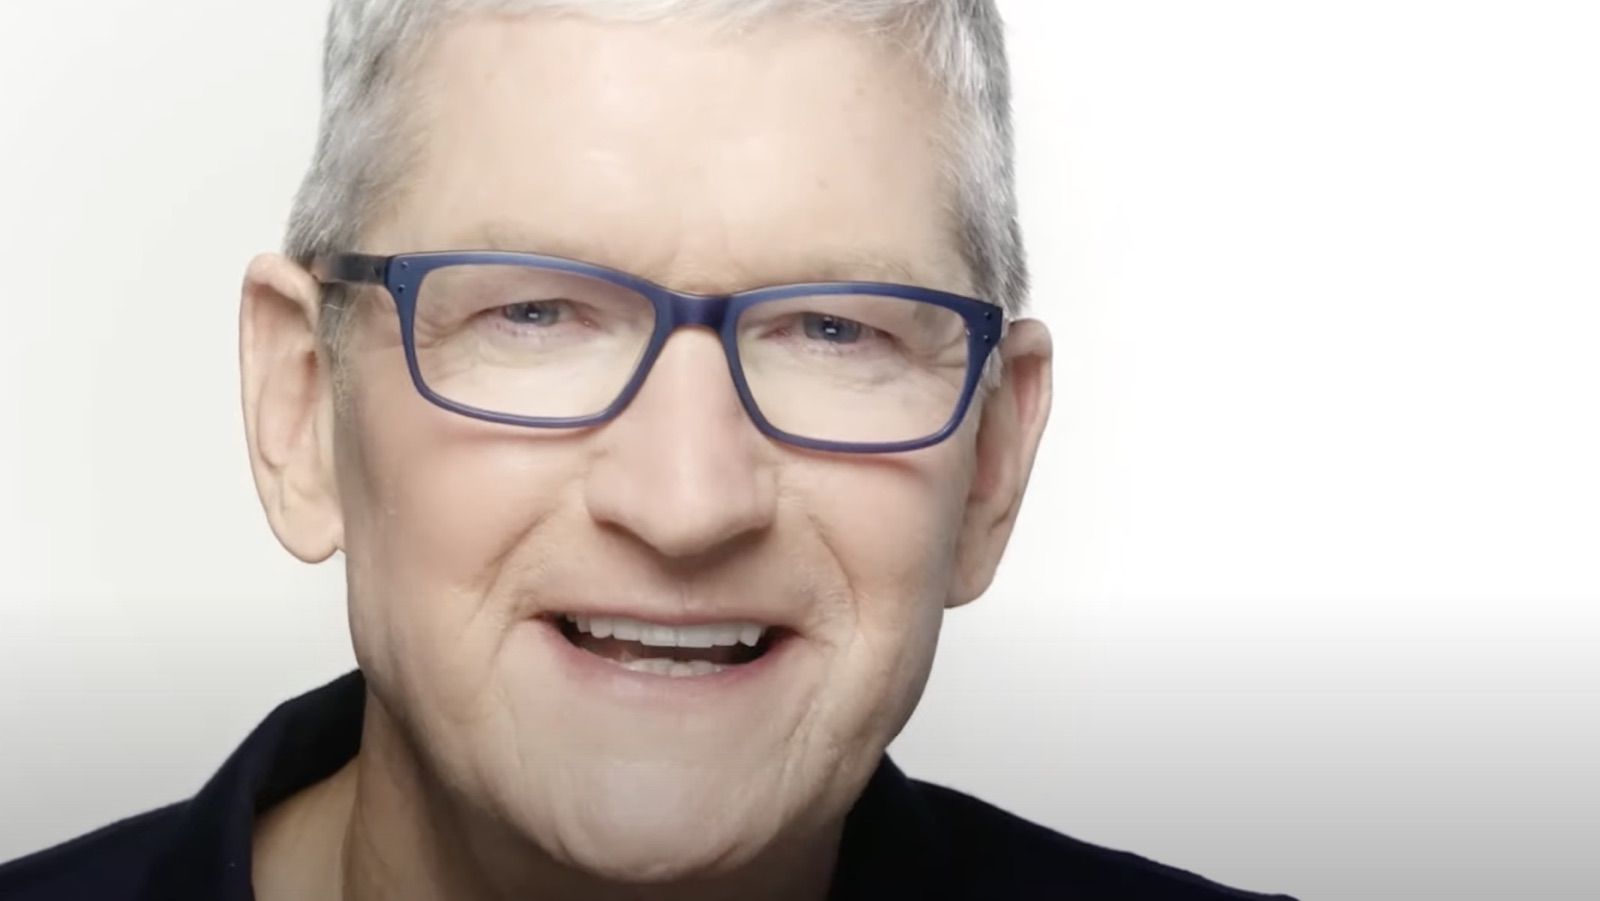 Tim Cook: Not Too Long From Now, You’ll Wonder How You Led Your Life Without AR